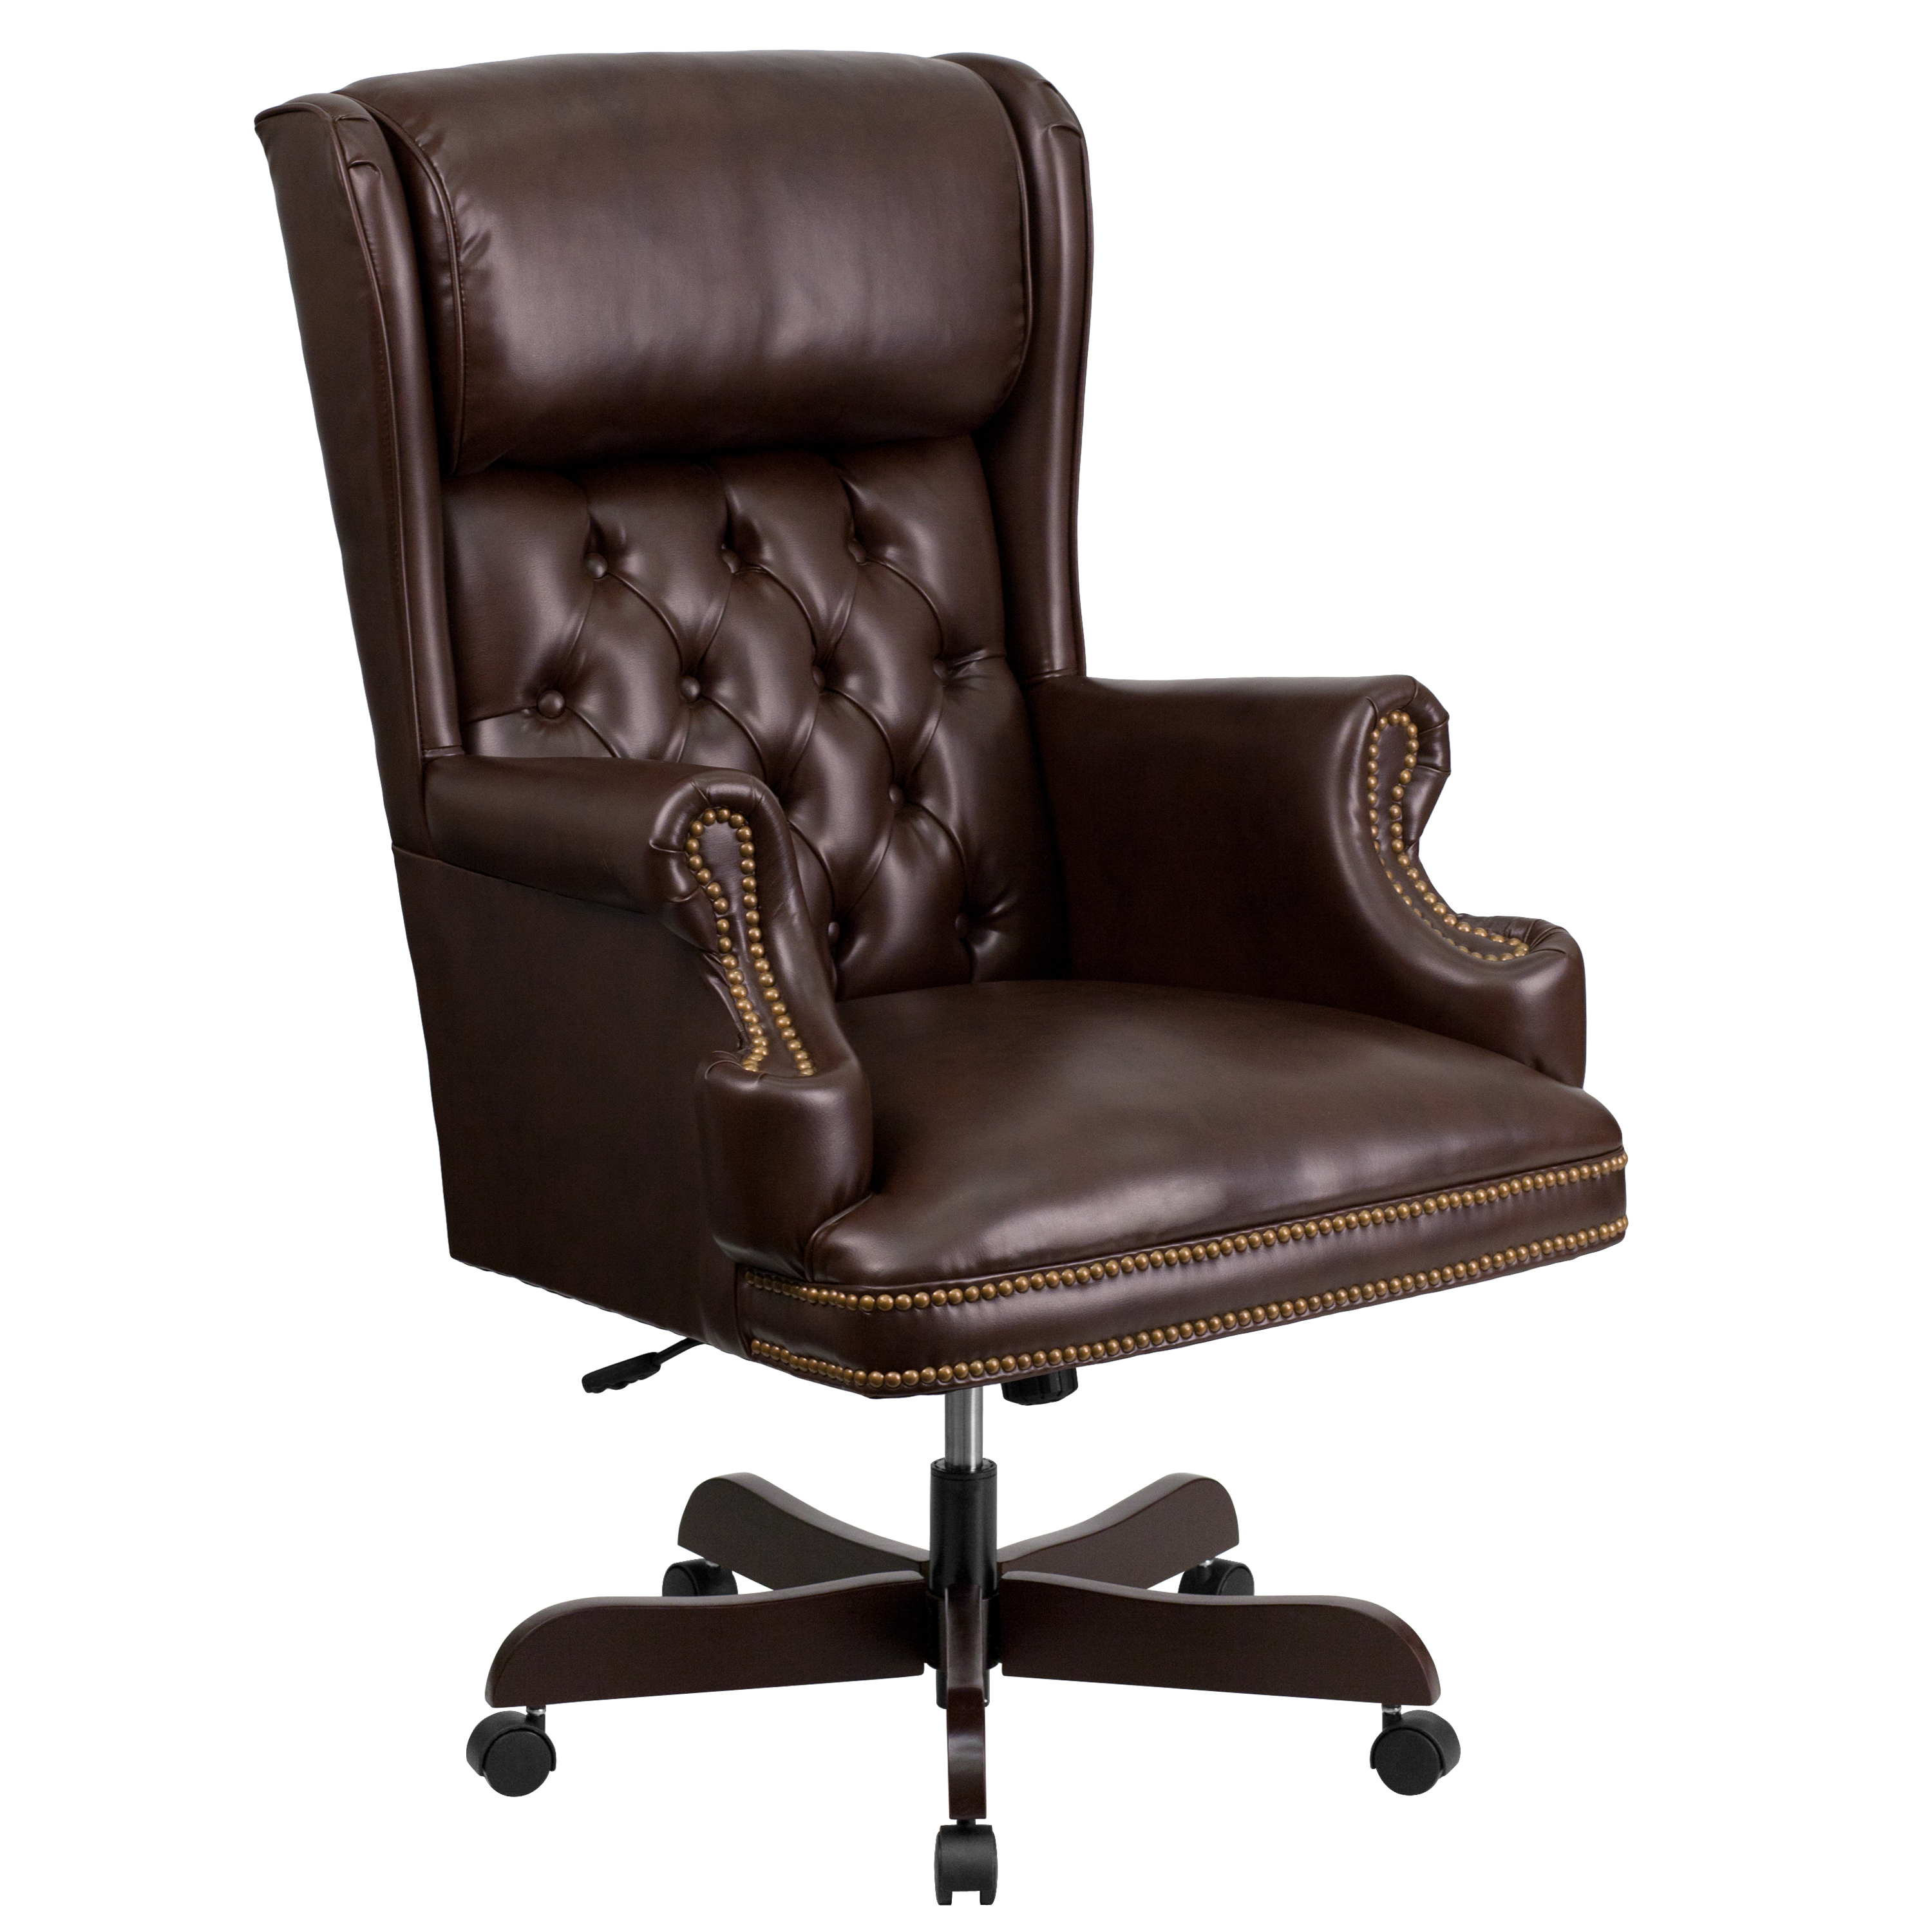 Flash Furniture CI-J600-BRN-GG High Back Traditional Tufted Brown LeatherSoft Executive Office Chair with Oversized Headrest & Nail Trim Arms